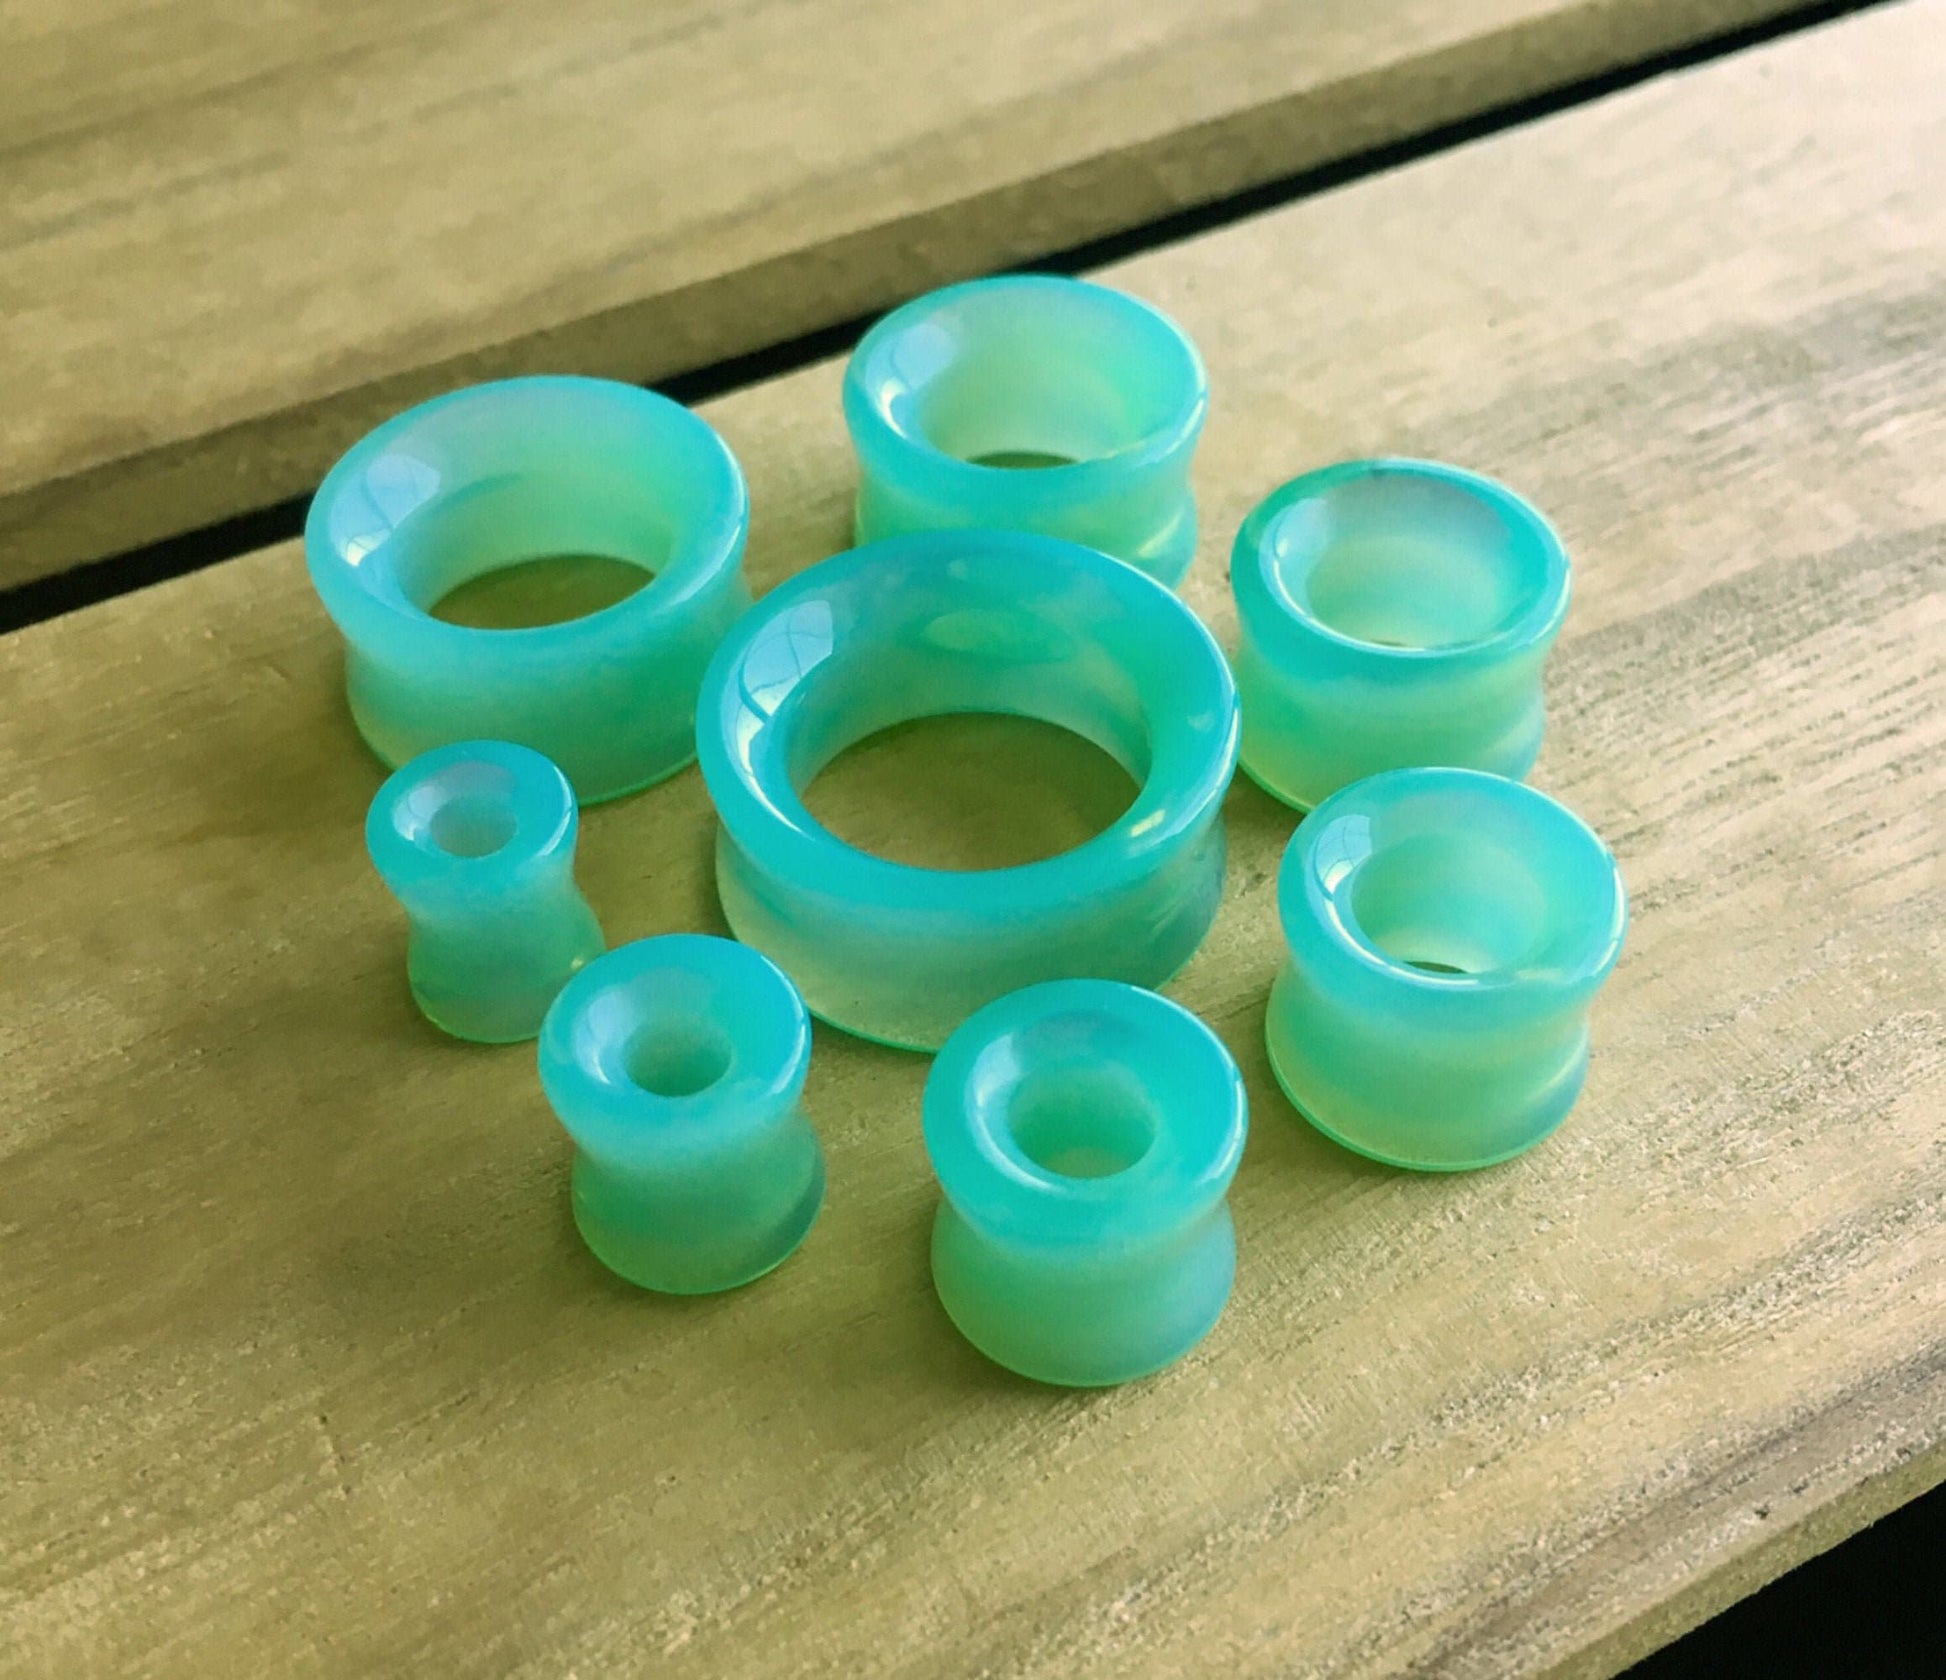 PAIR of Stunning Green Opalite Glass Double Flare Tunnels - Gauges 0g (8mm) thru 1" (25mm) available!